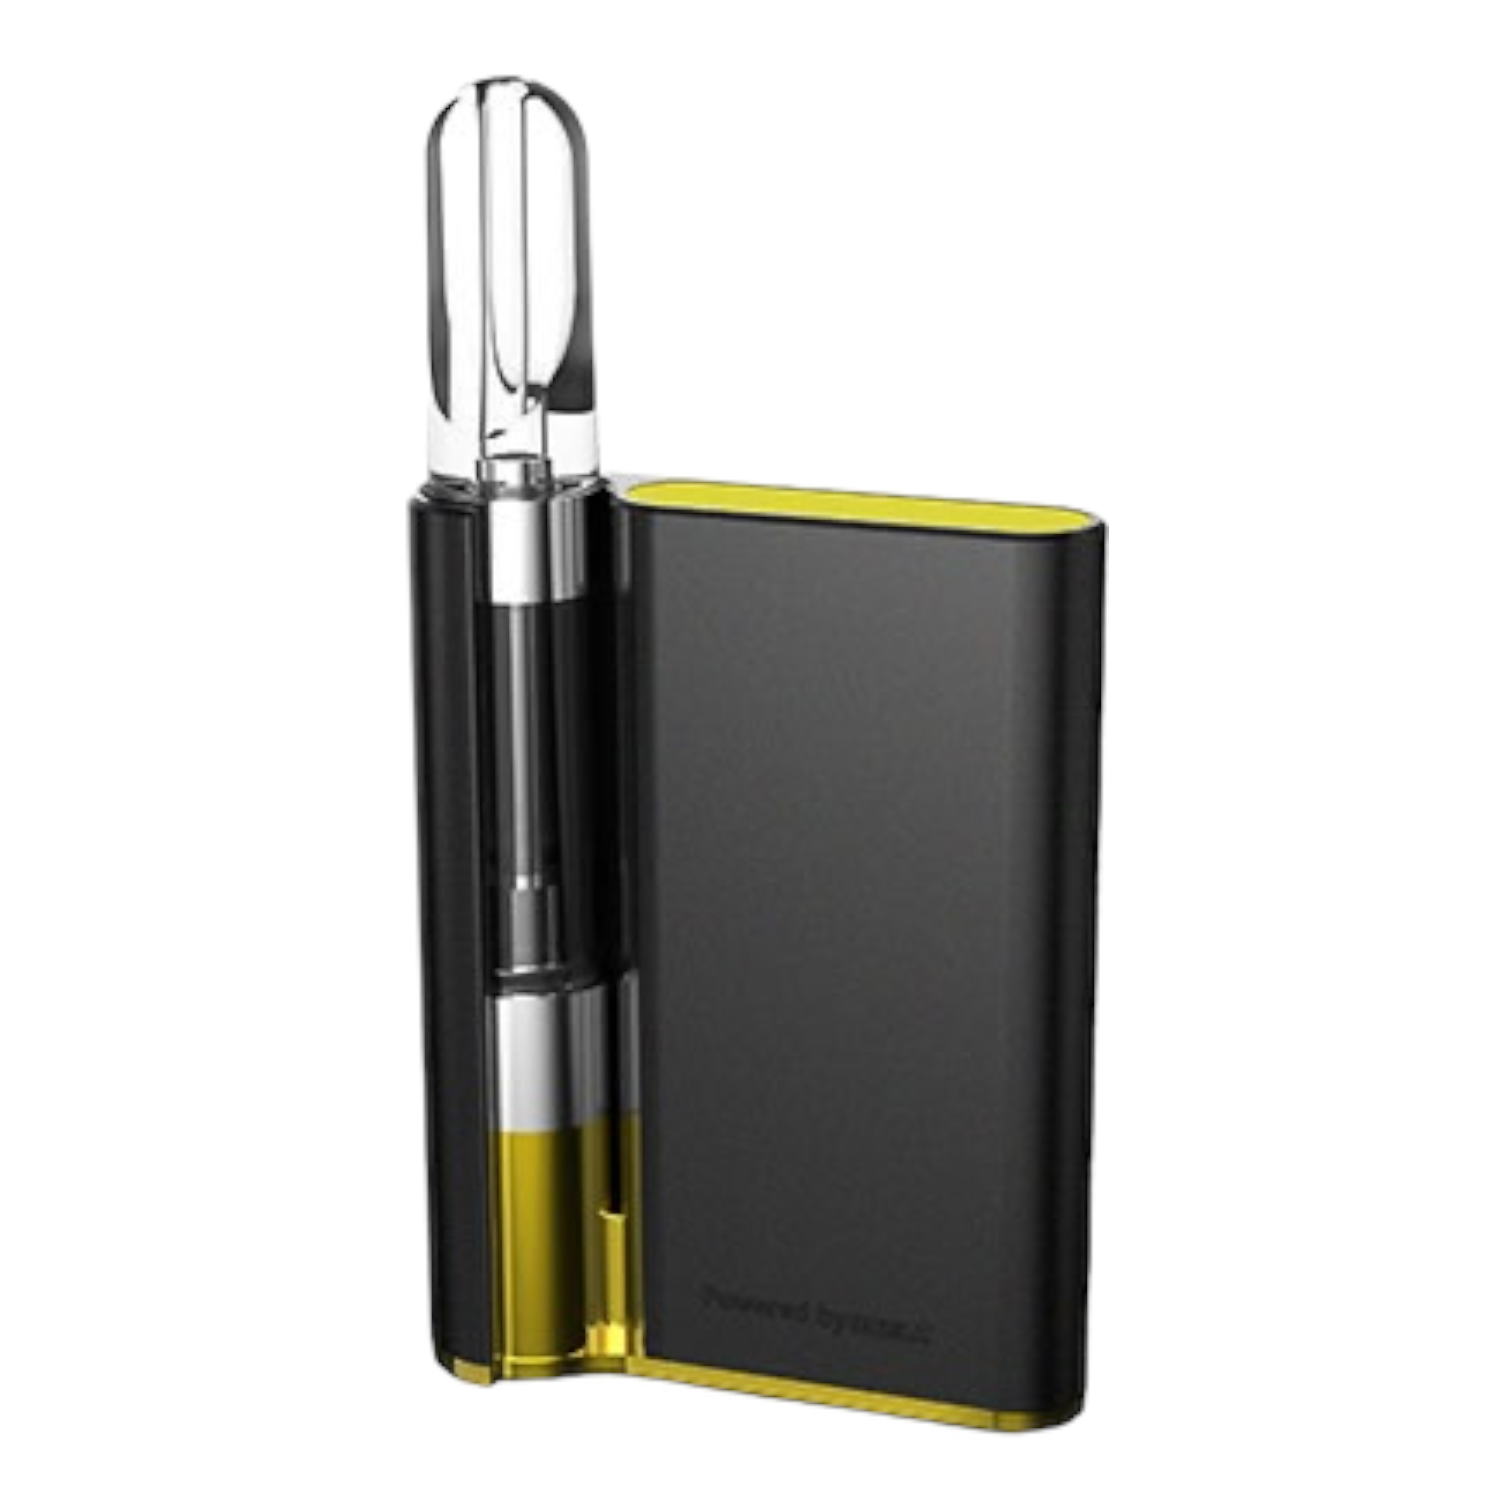 CCELL - Palm Battery - Black & Yellow